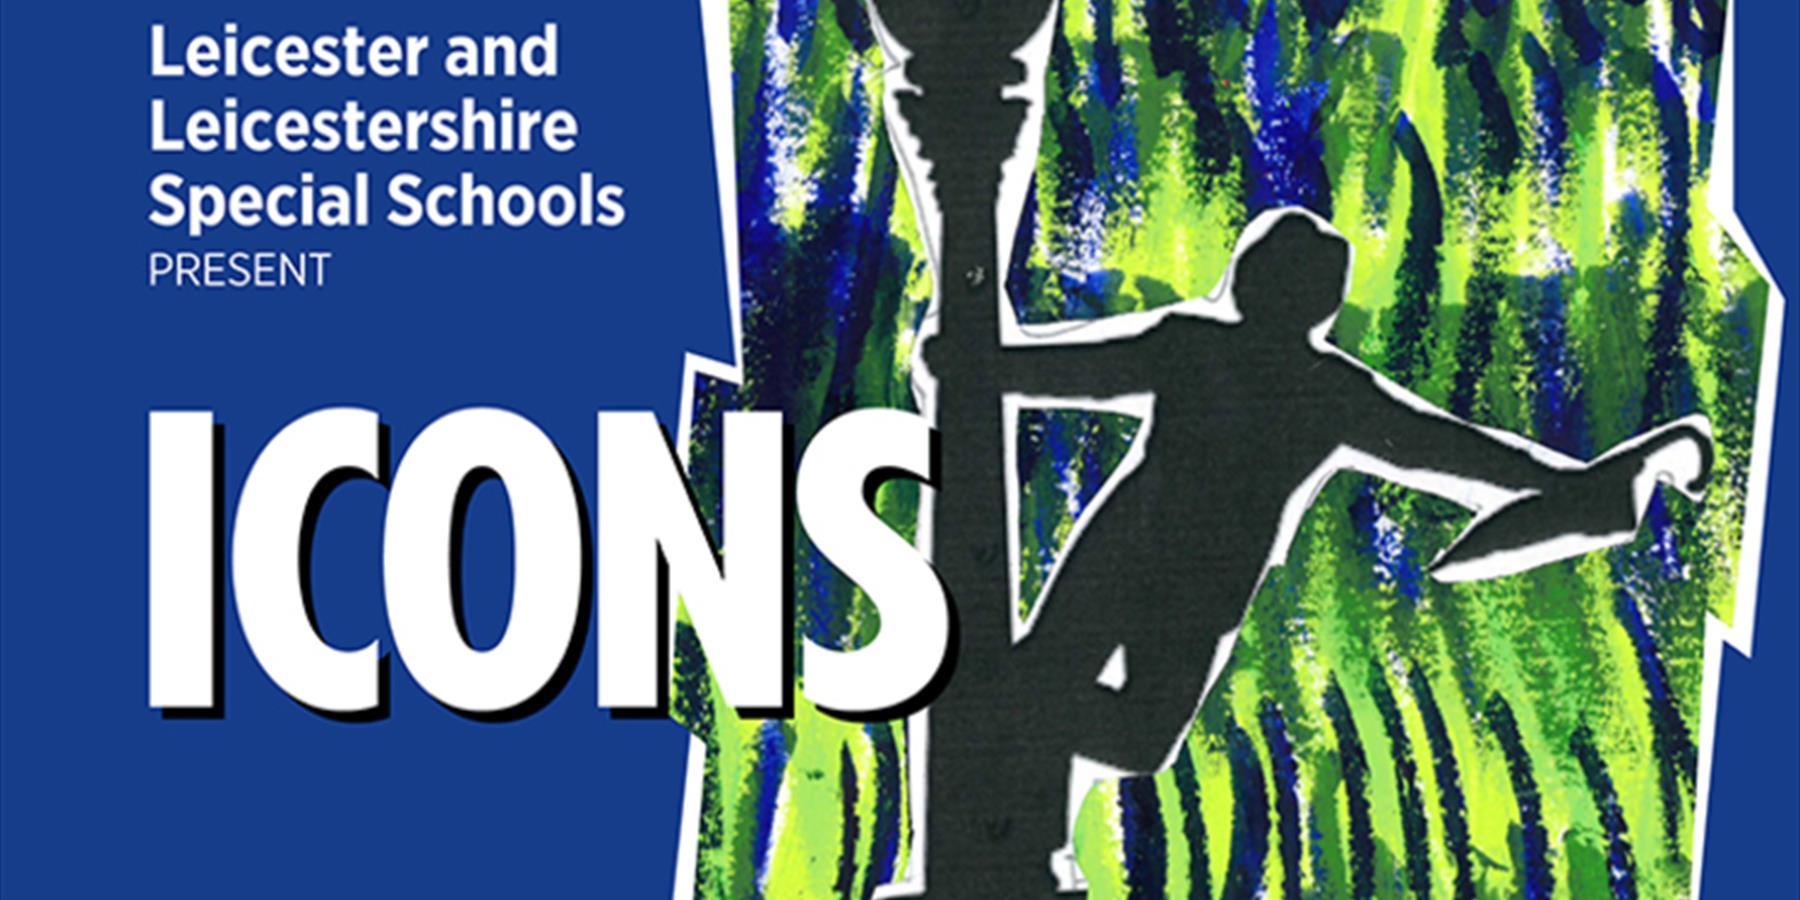 Leicester and Leicestershire Special Schools Present :'Icons'